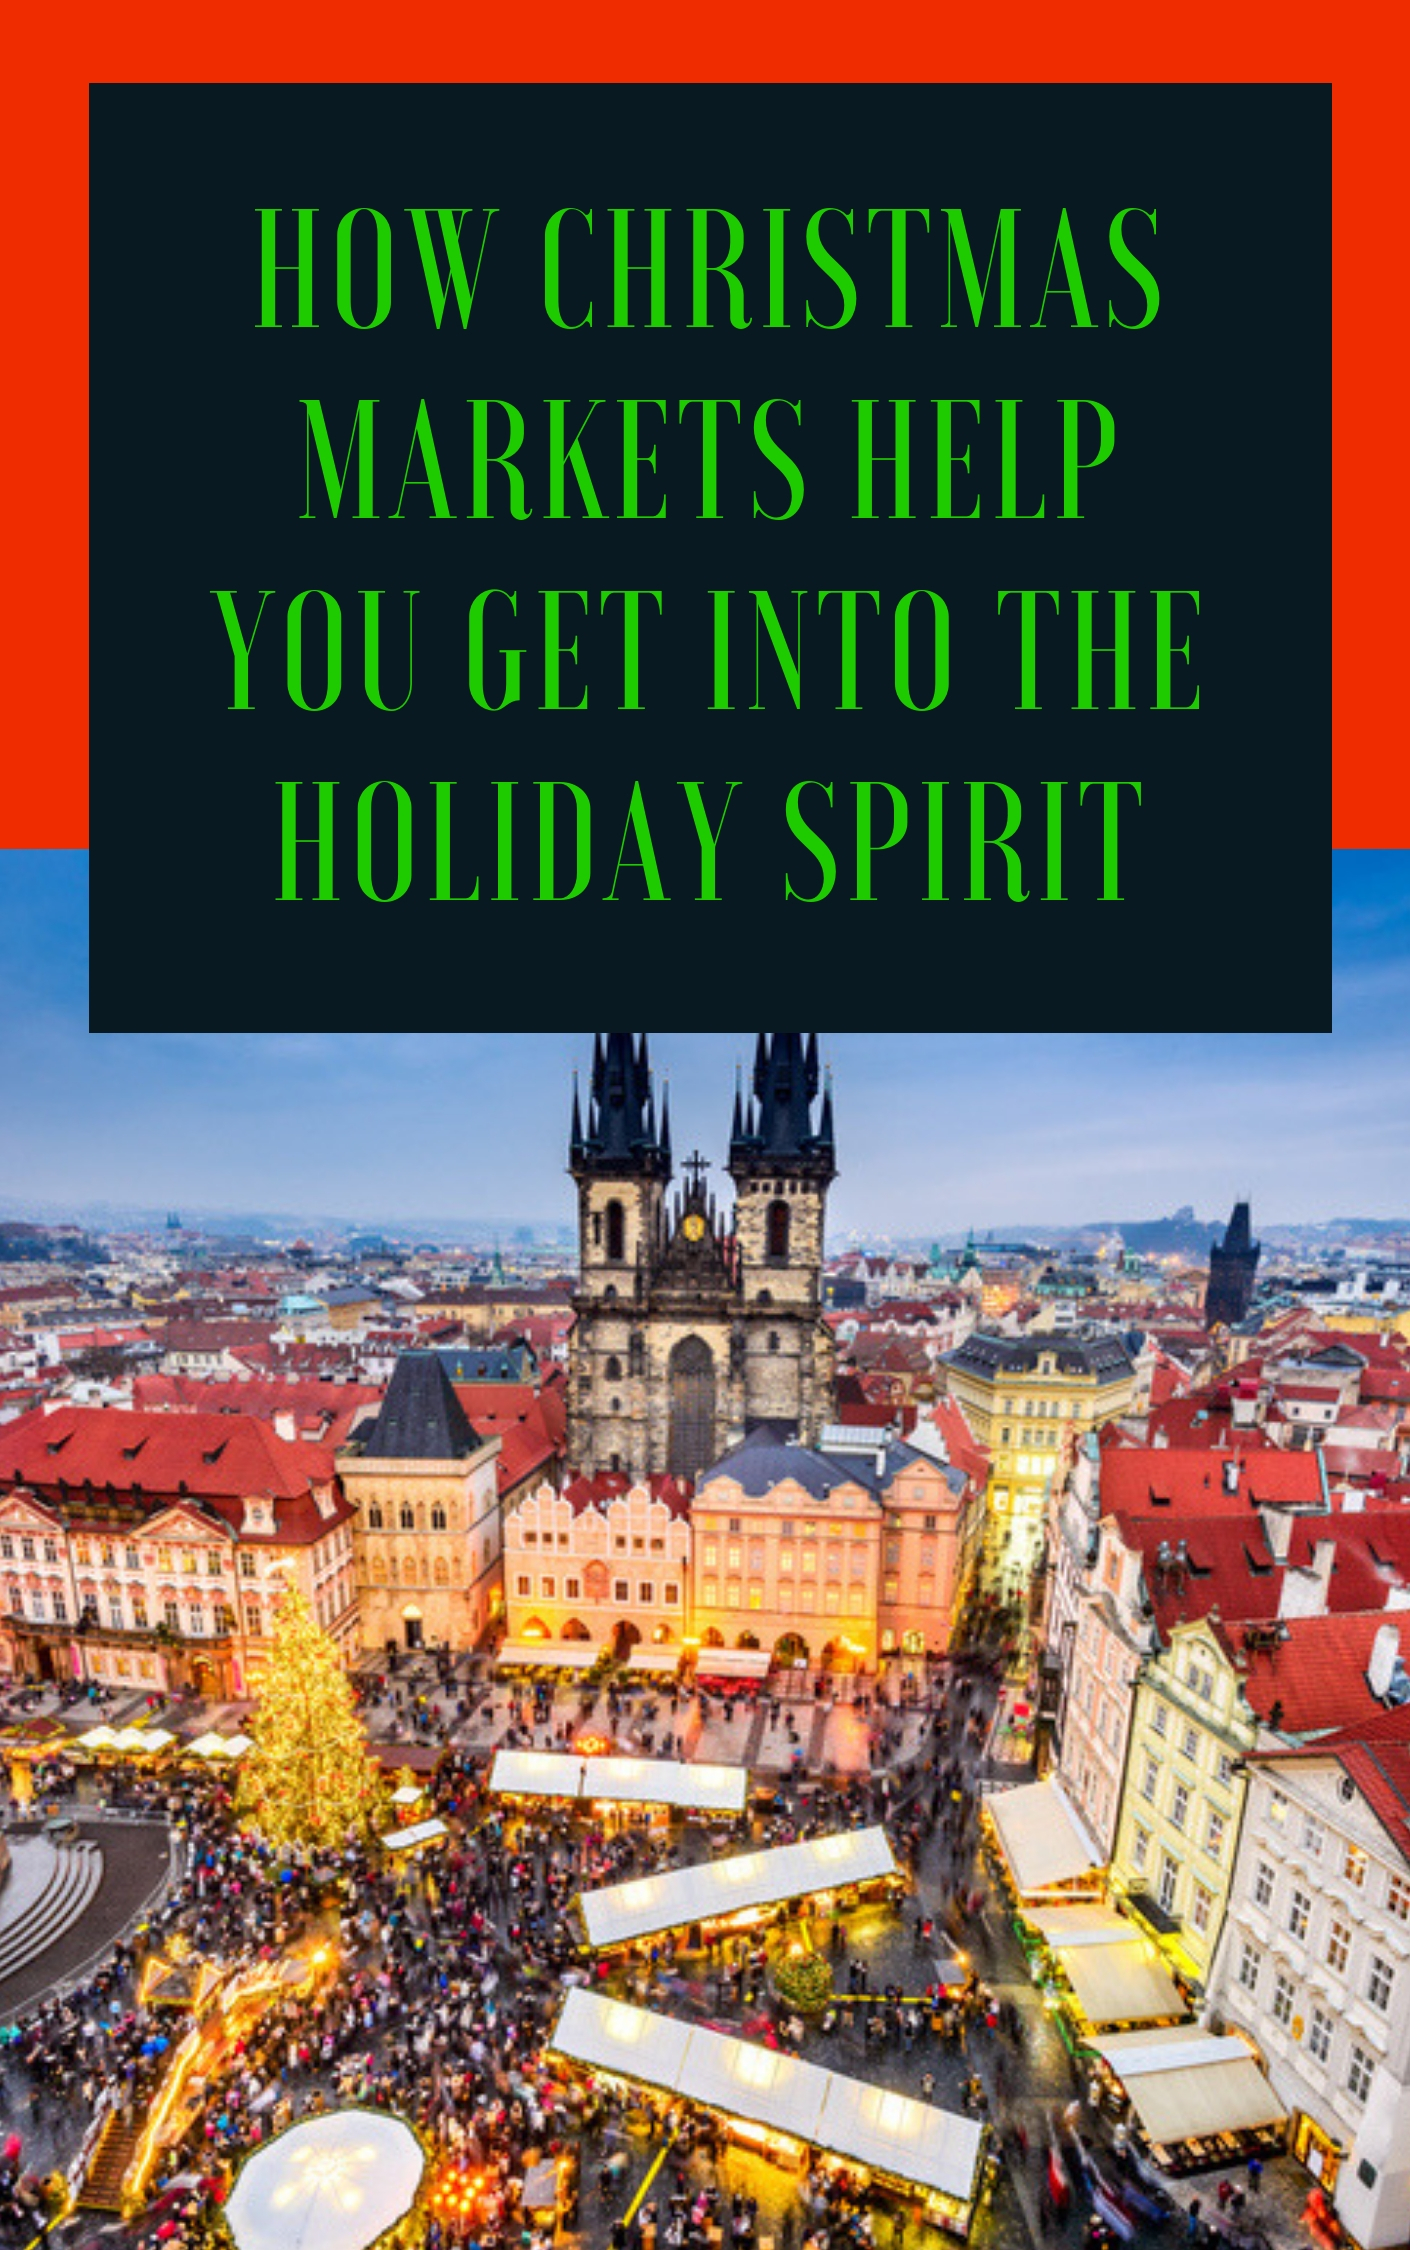 How Christmas Markets Help You Get Into the Holiday Spirit